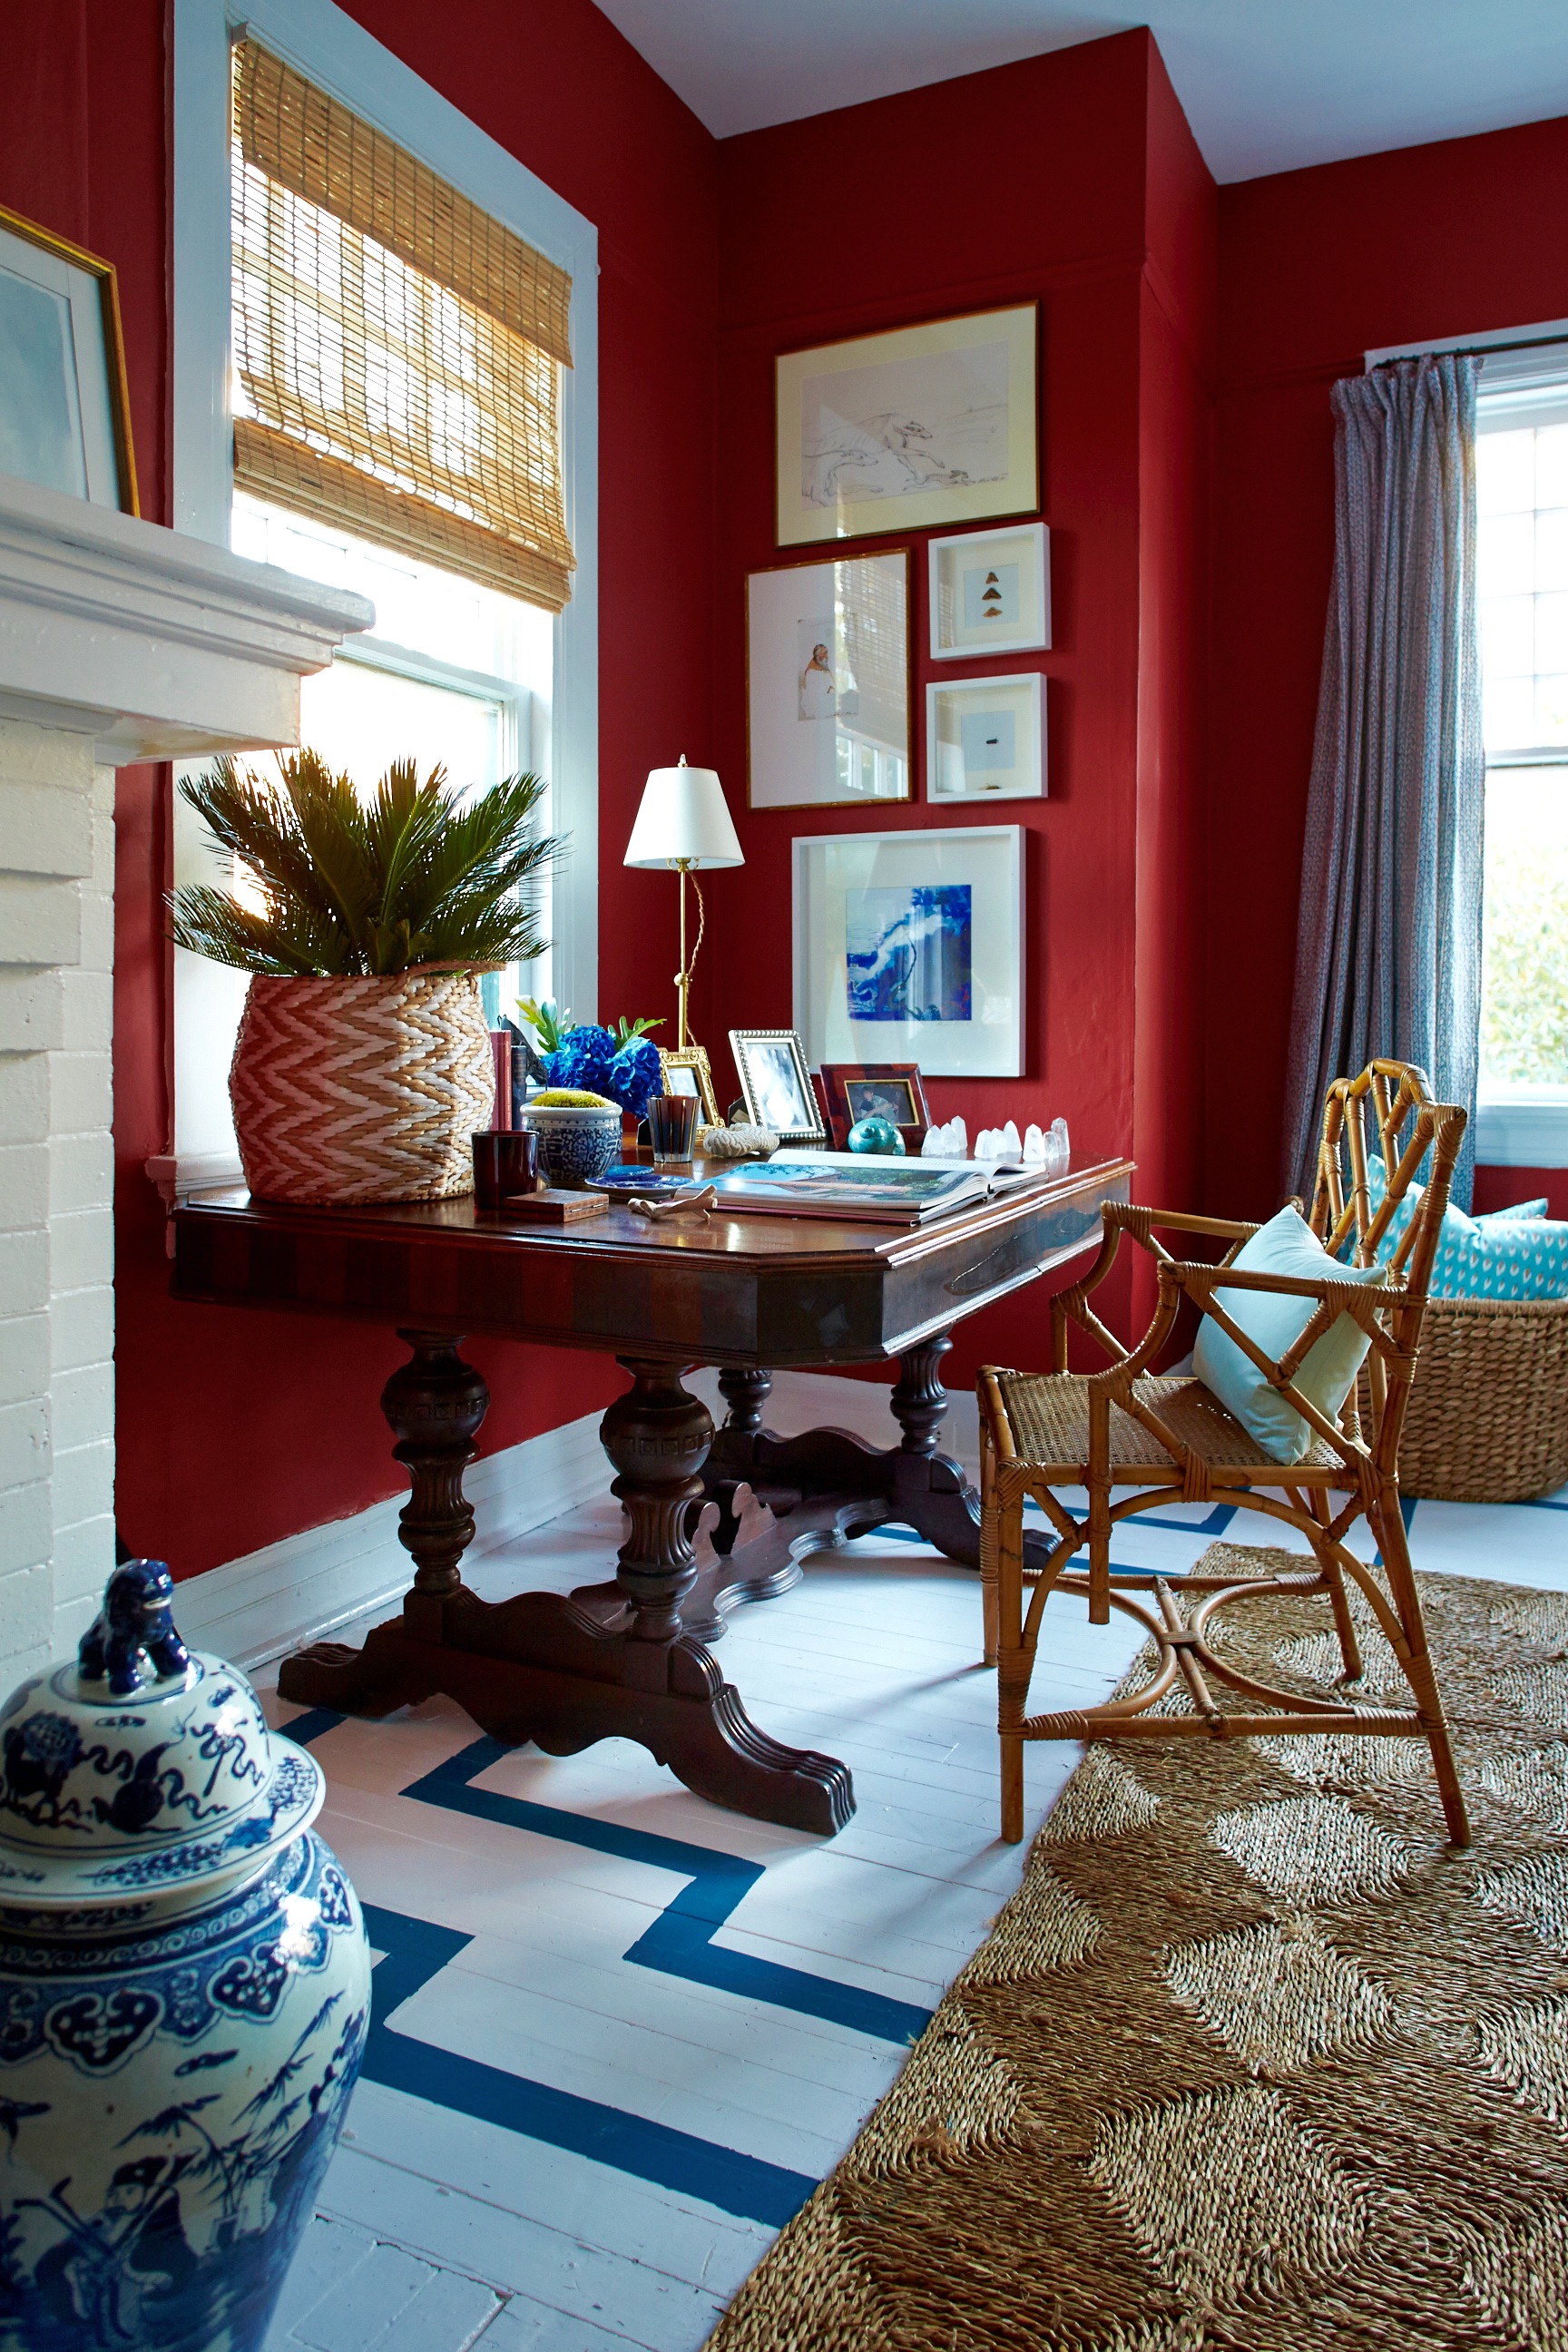 Living room in red & blue